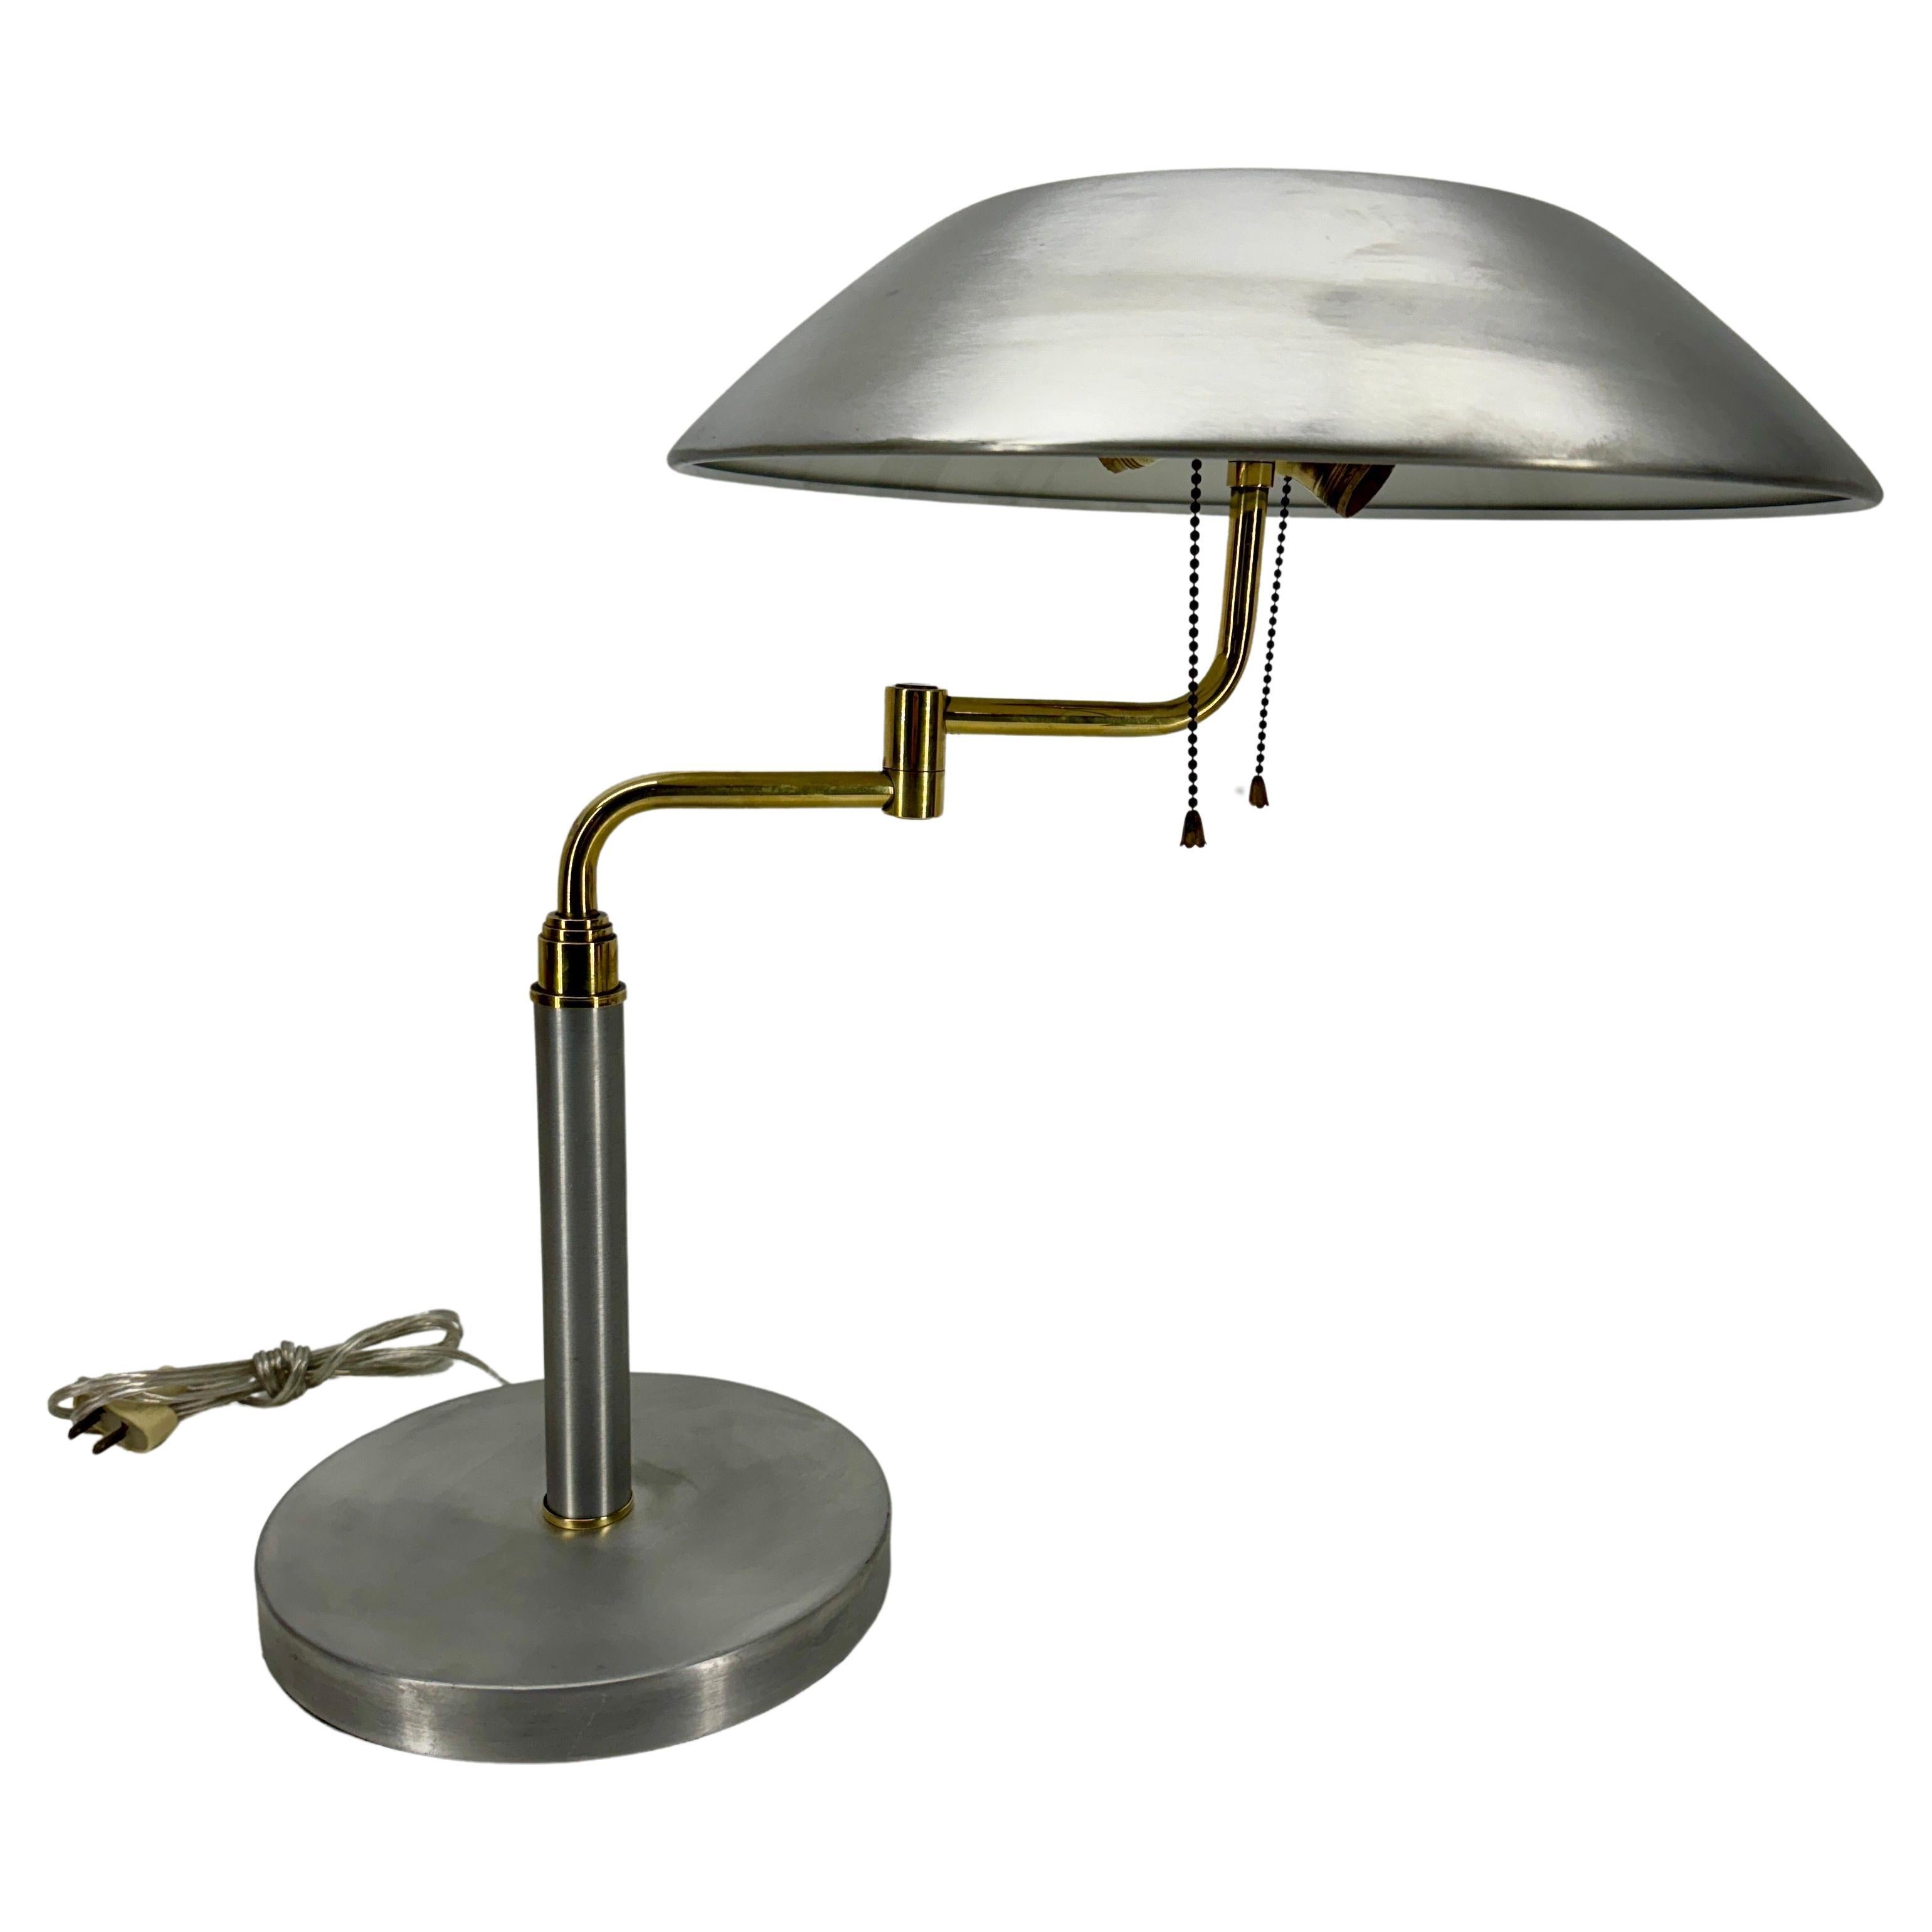 American Vintage Mid-Century Modern Desk Lamp in Aluminum and Brass  For Sale 1